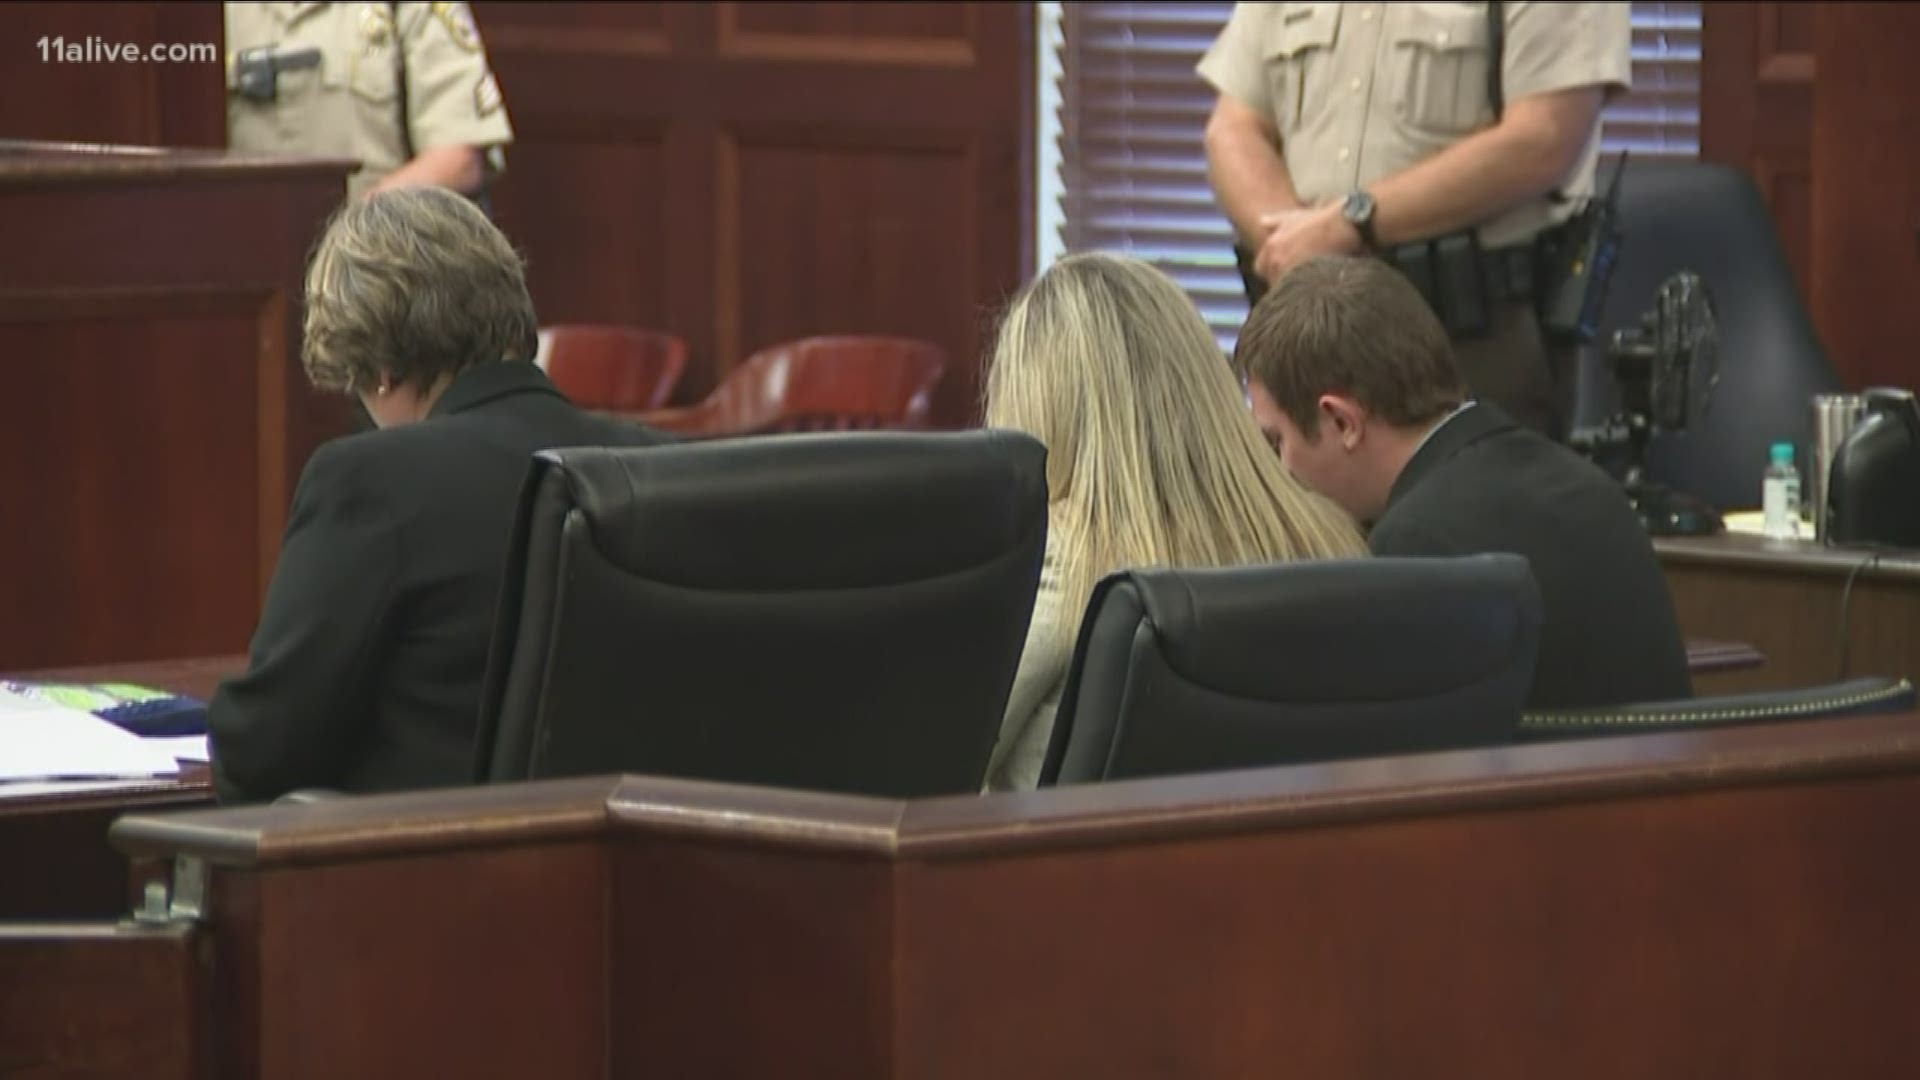 Here's a look at the moment the verdict was read in court.